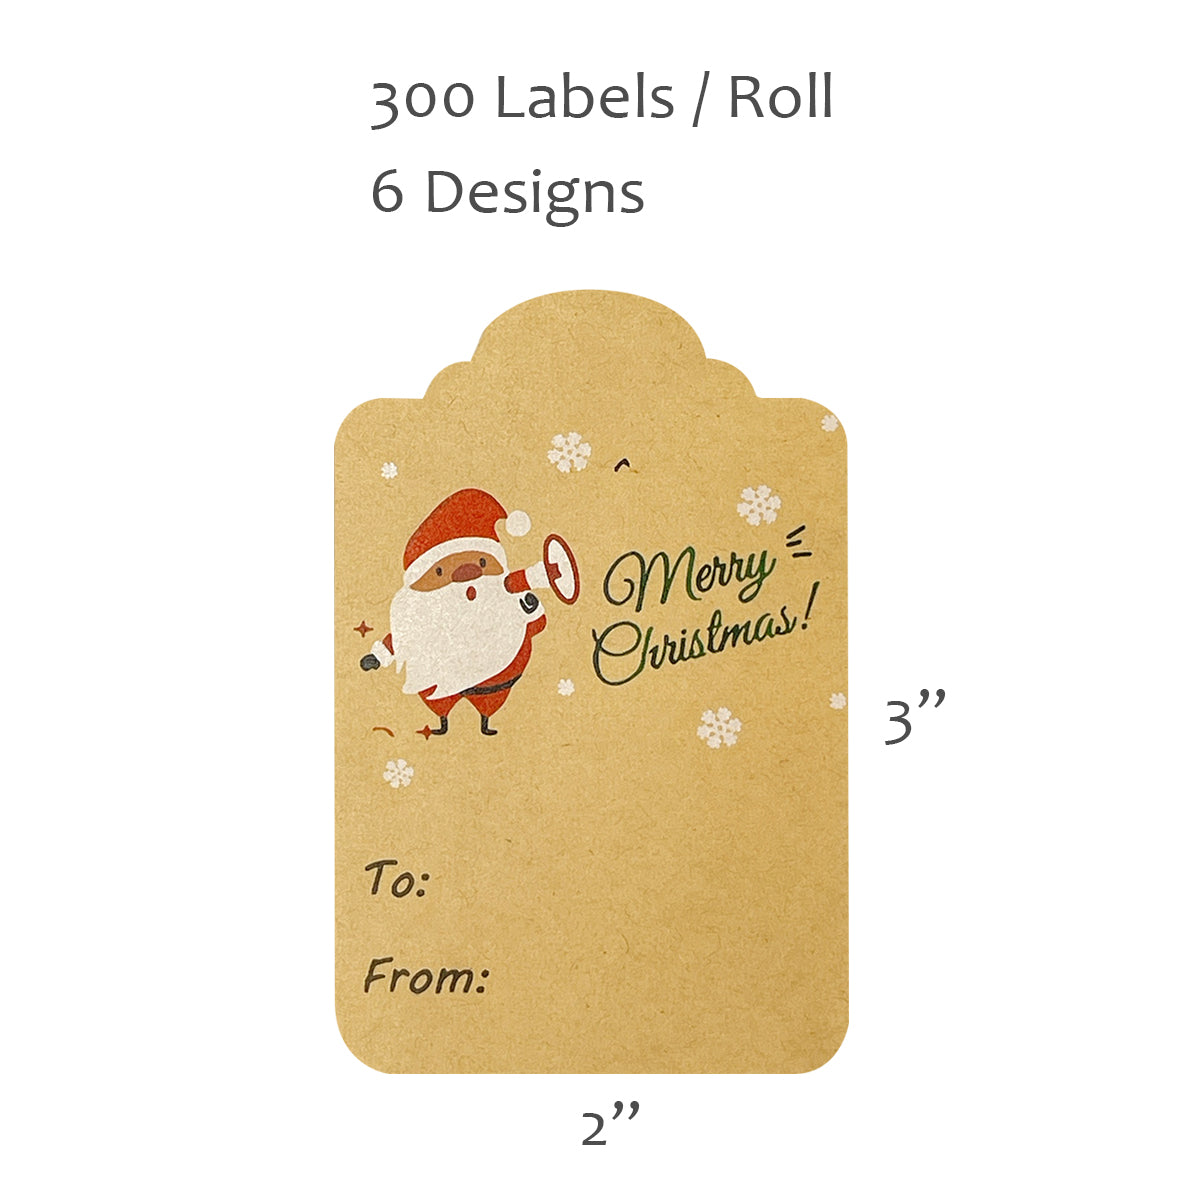 Holiday Gift Tag Stickers Round